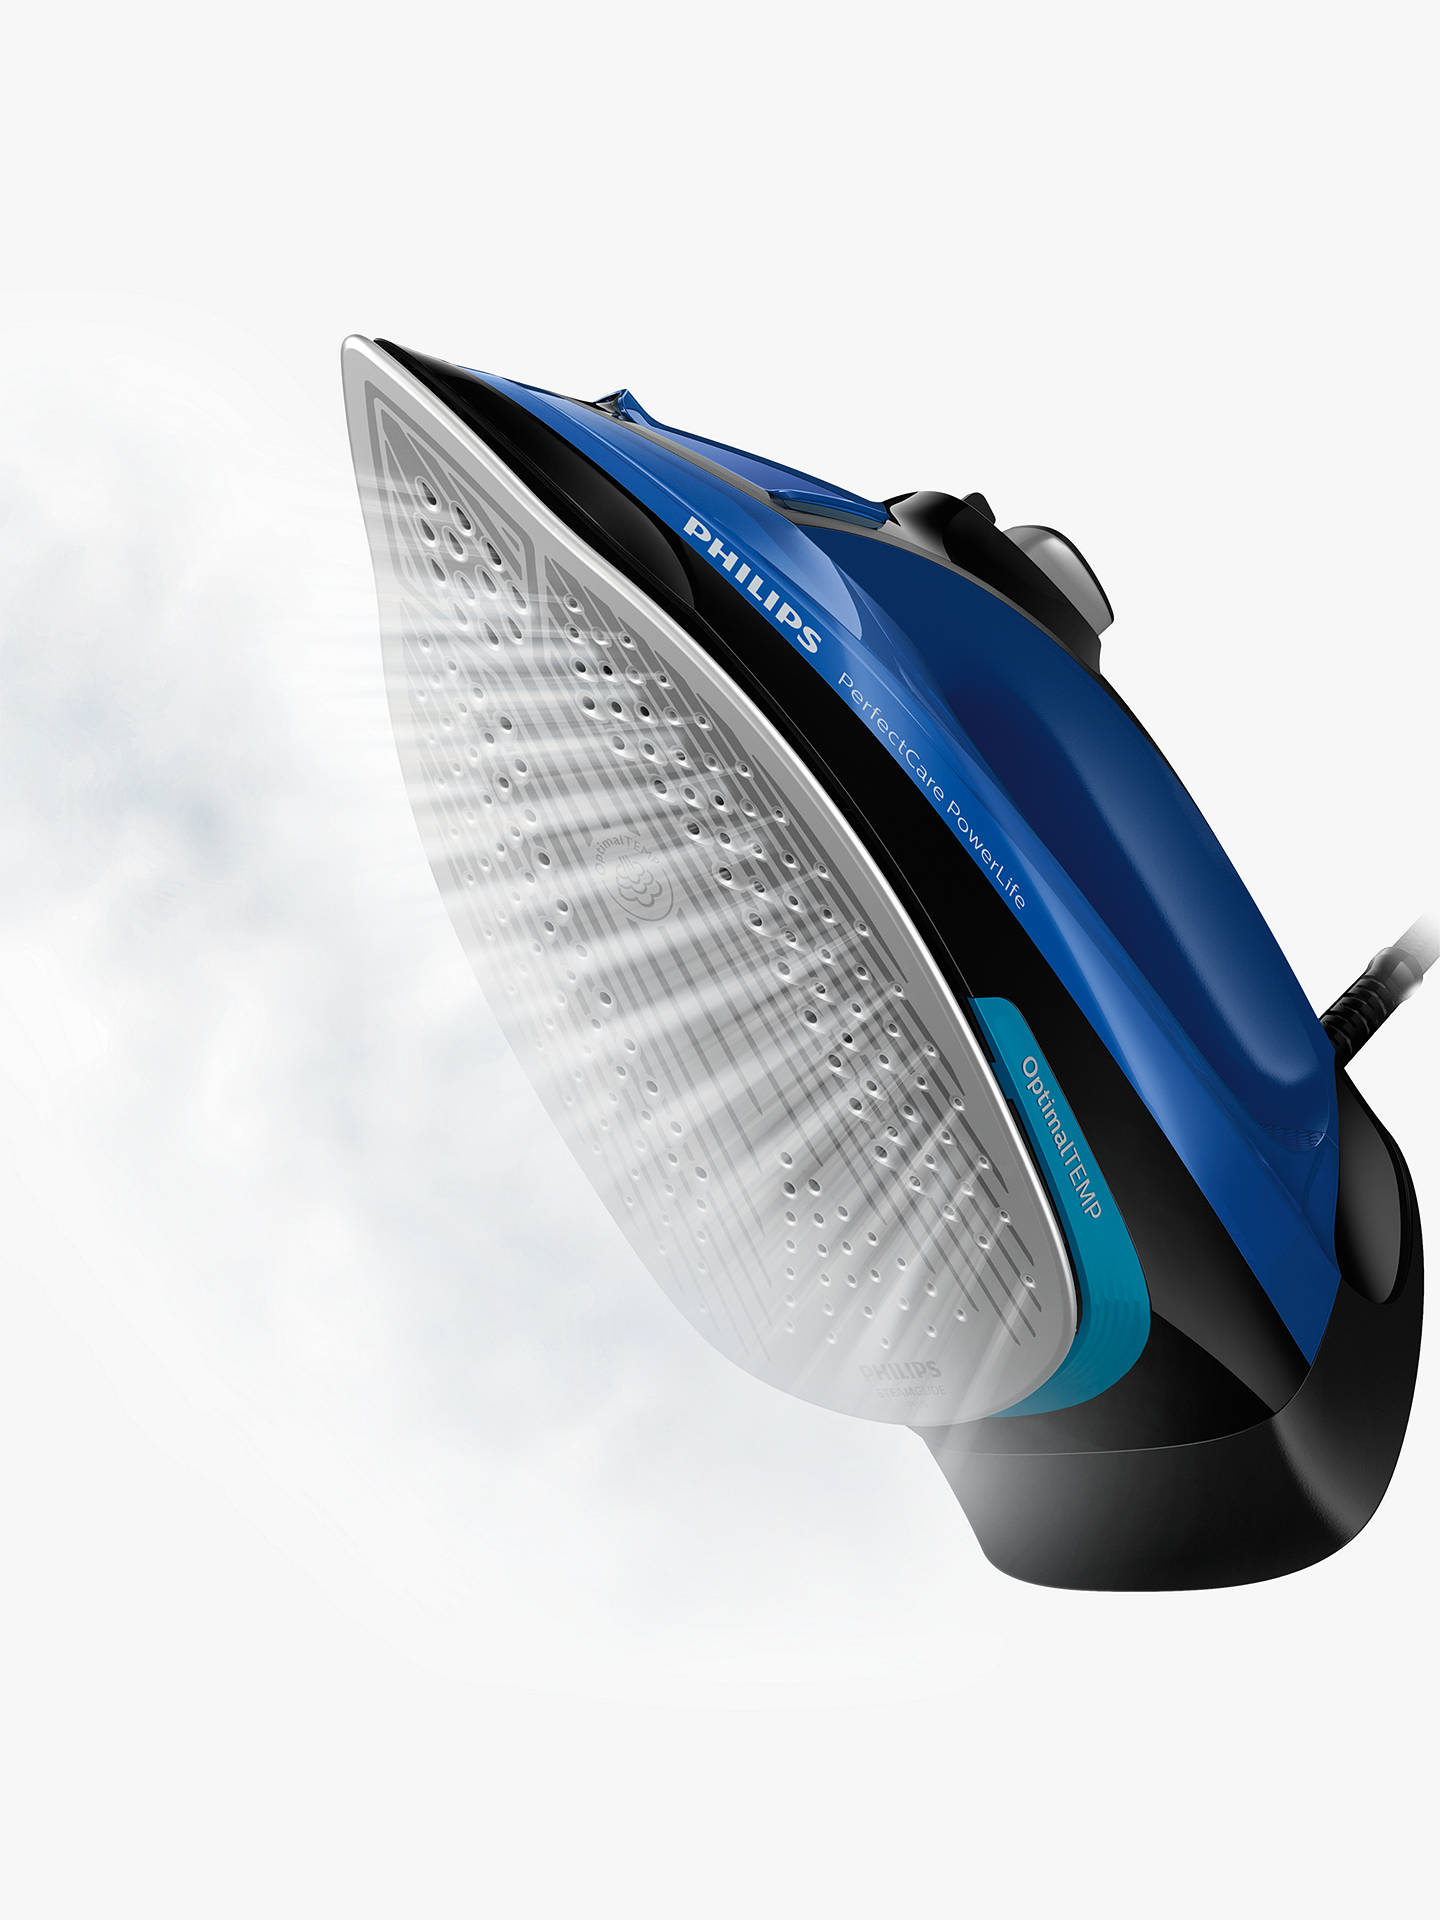 Philips PerfectCare PowerLife Steam Iron GC3920//26 with up to 180g Steam Boost /& No Fabric Burns Technology